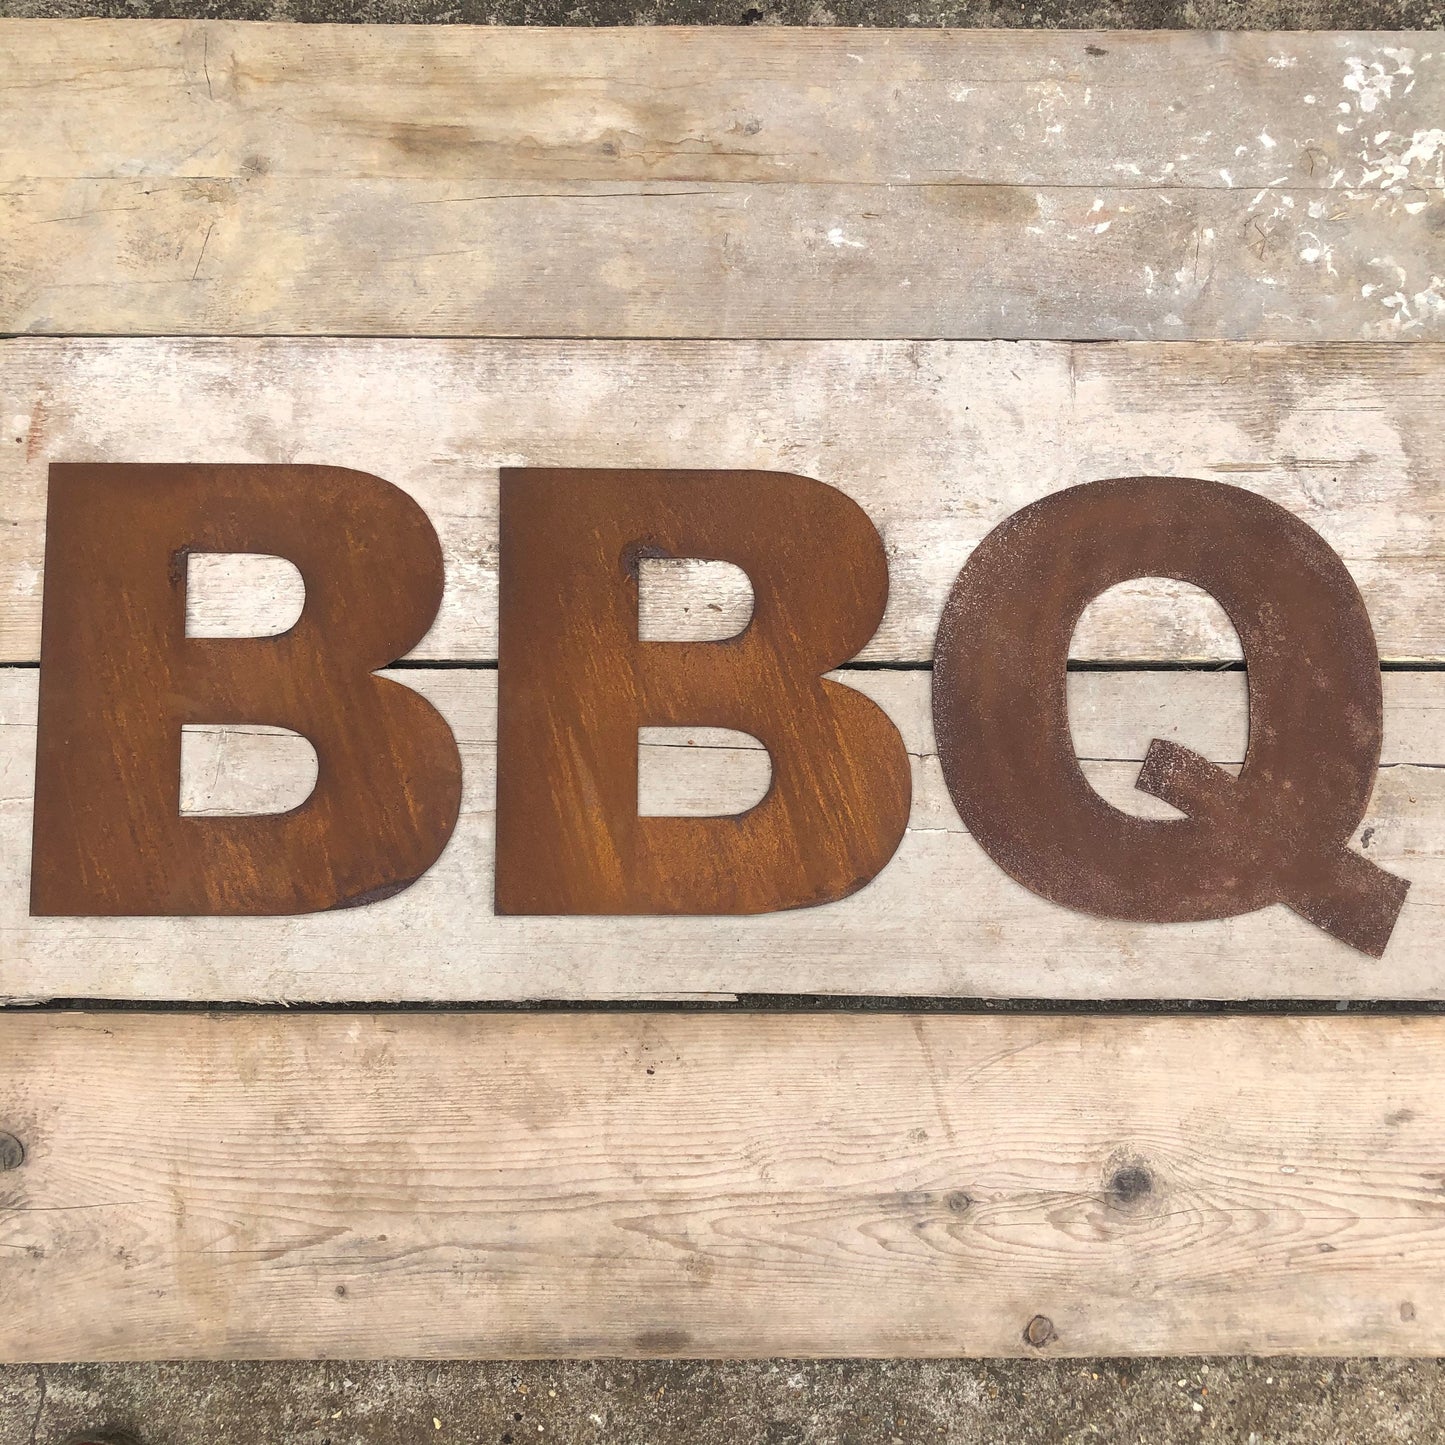 Rusty metal industrial style lettering spelling out BBQ